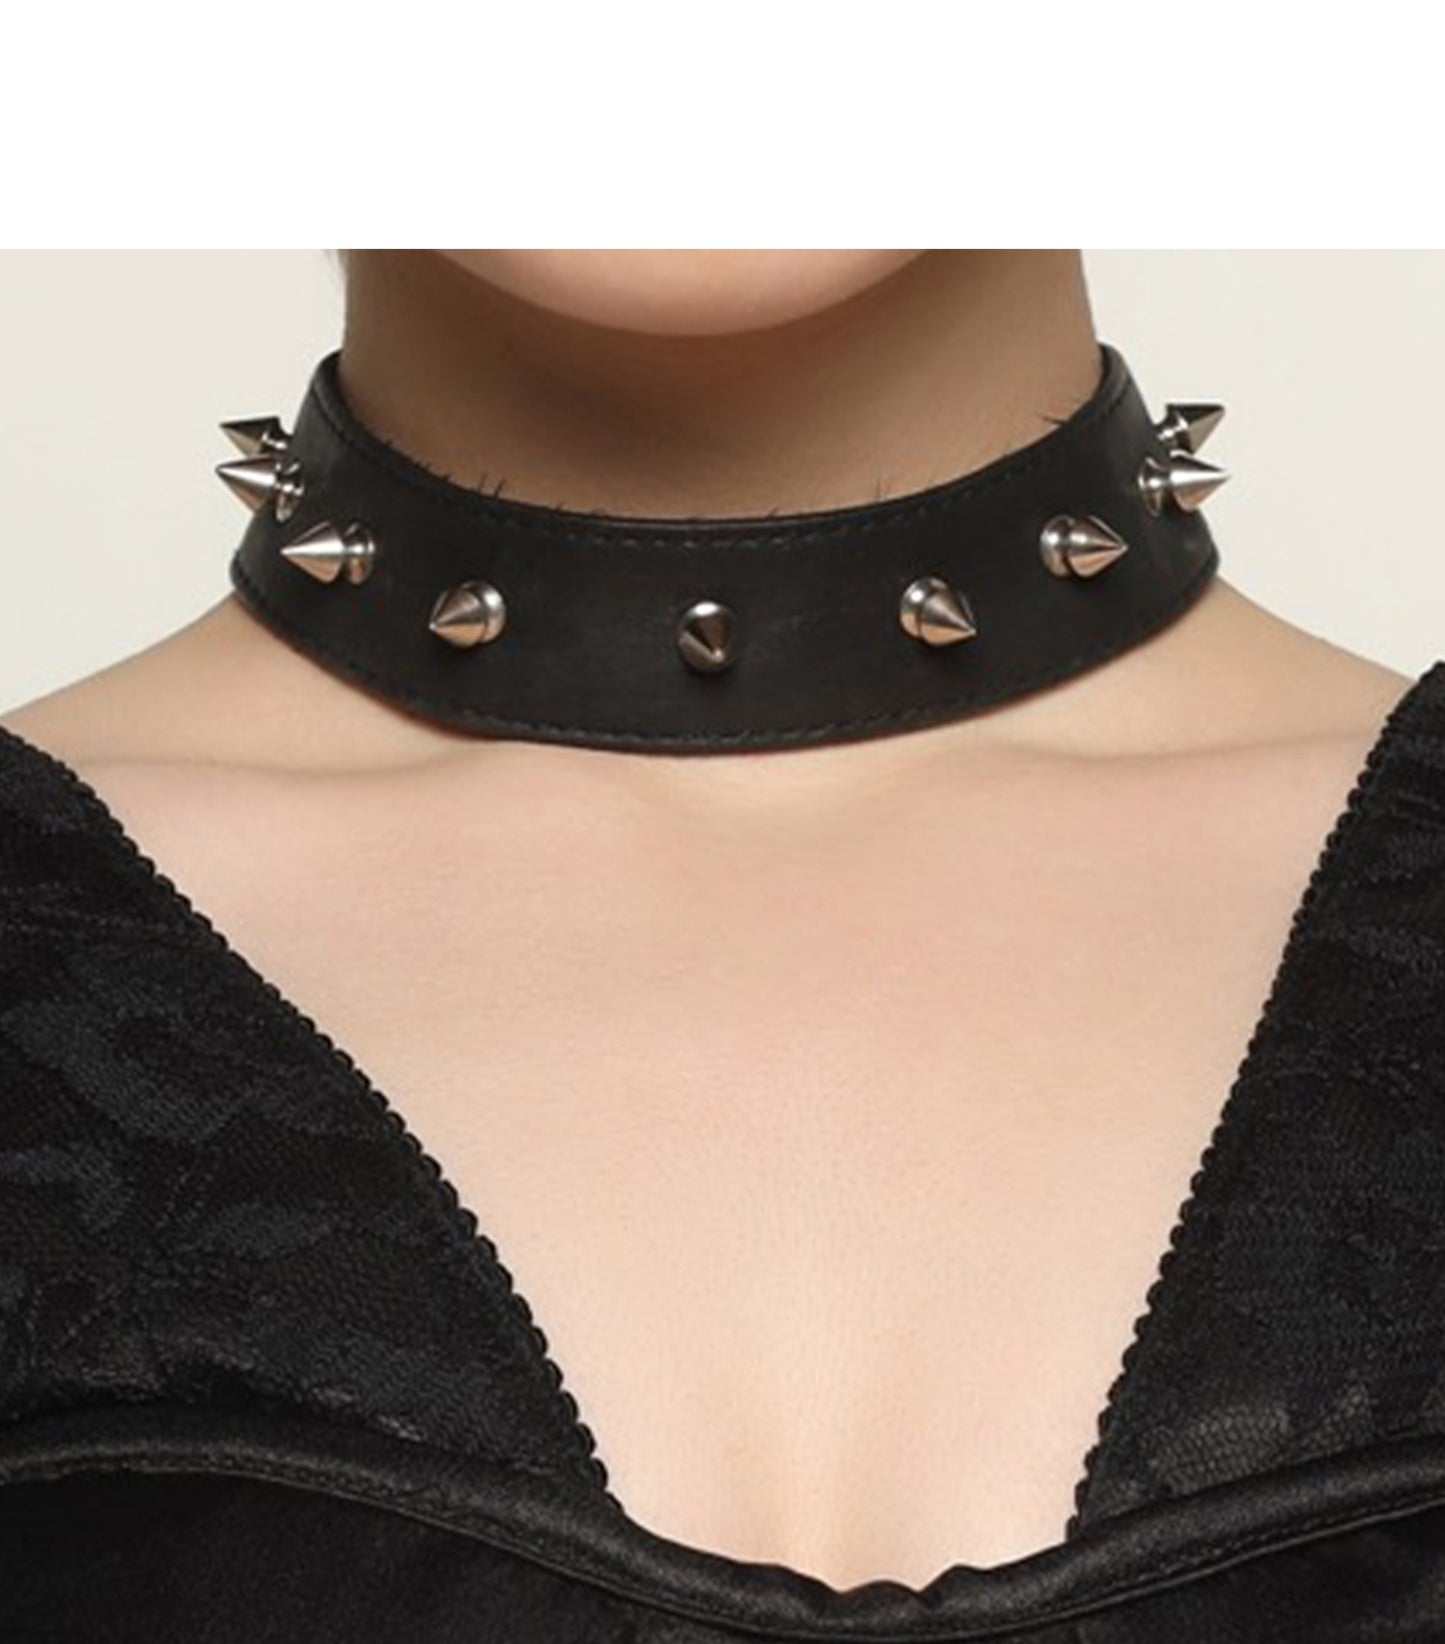 Retro Rebellion - Punk Goth Studded Leather Choker with Spikes